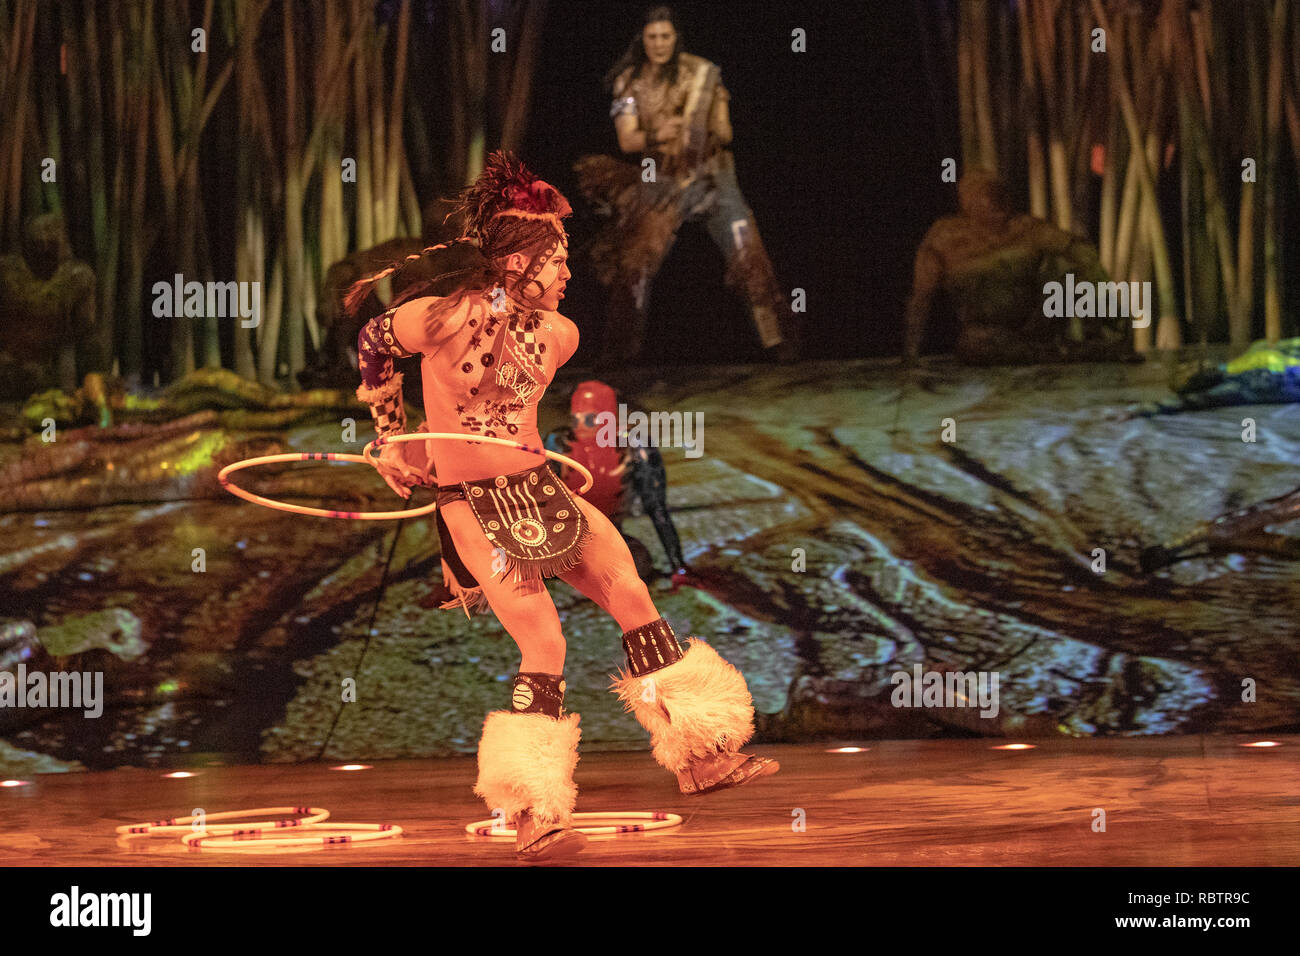 London, England. 11th January 201, Cast members of Cirque Du Soleil perform in 'Cirque Du Soleil's Totem' dress rehearsal at The Royal Albert Hall ,England, © Jason Richardson / Alamy Live News Stock Photo